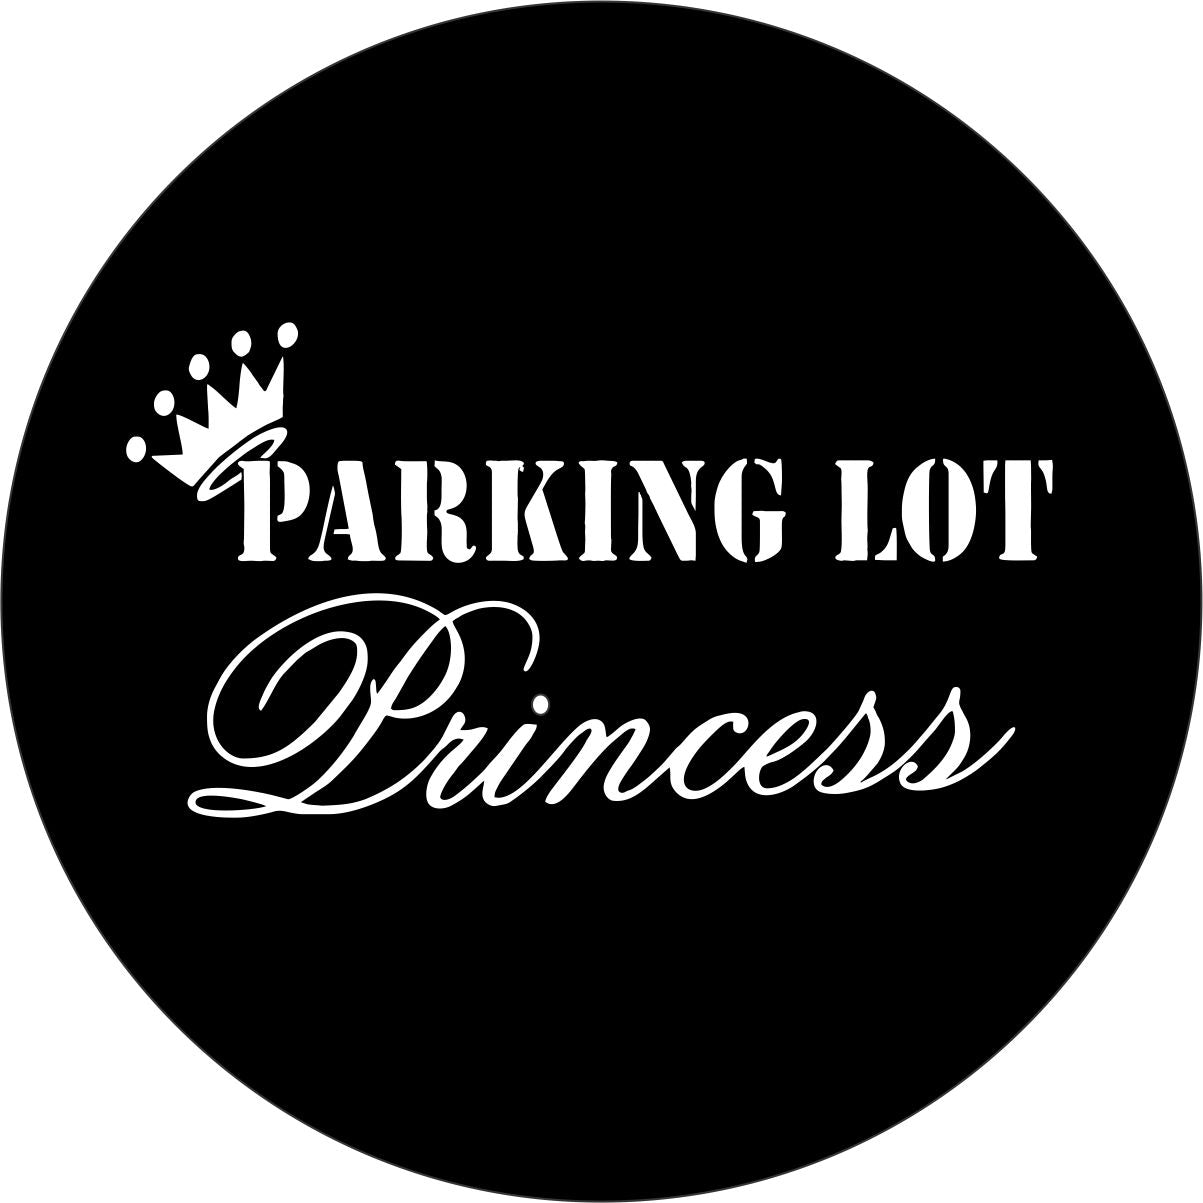 The words parking lot princess with a crown graphic on the P of parking mock up design of a black vinyl spare tire cover.